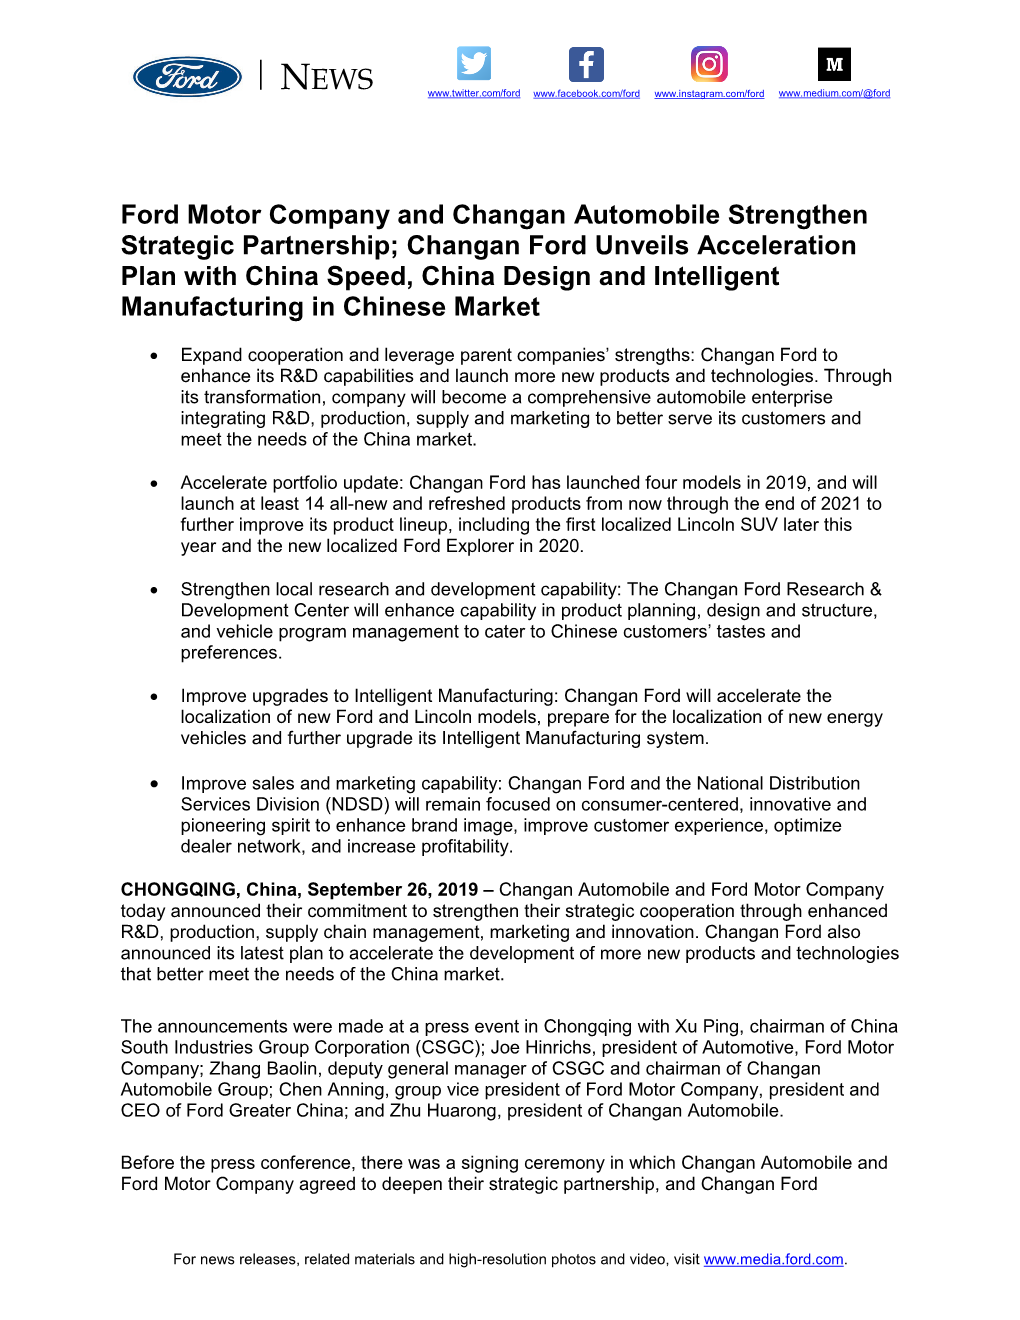 Ford Motor Company and Changan Automobile Strengthen Strategic